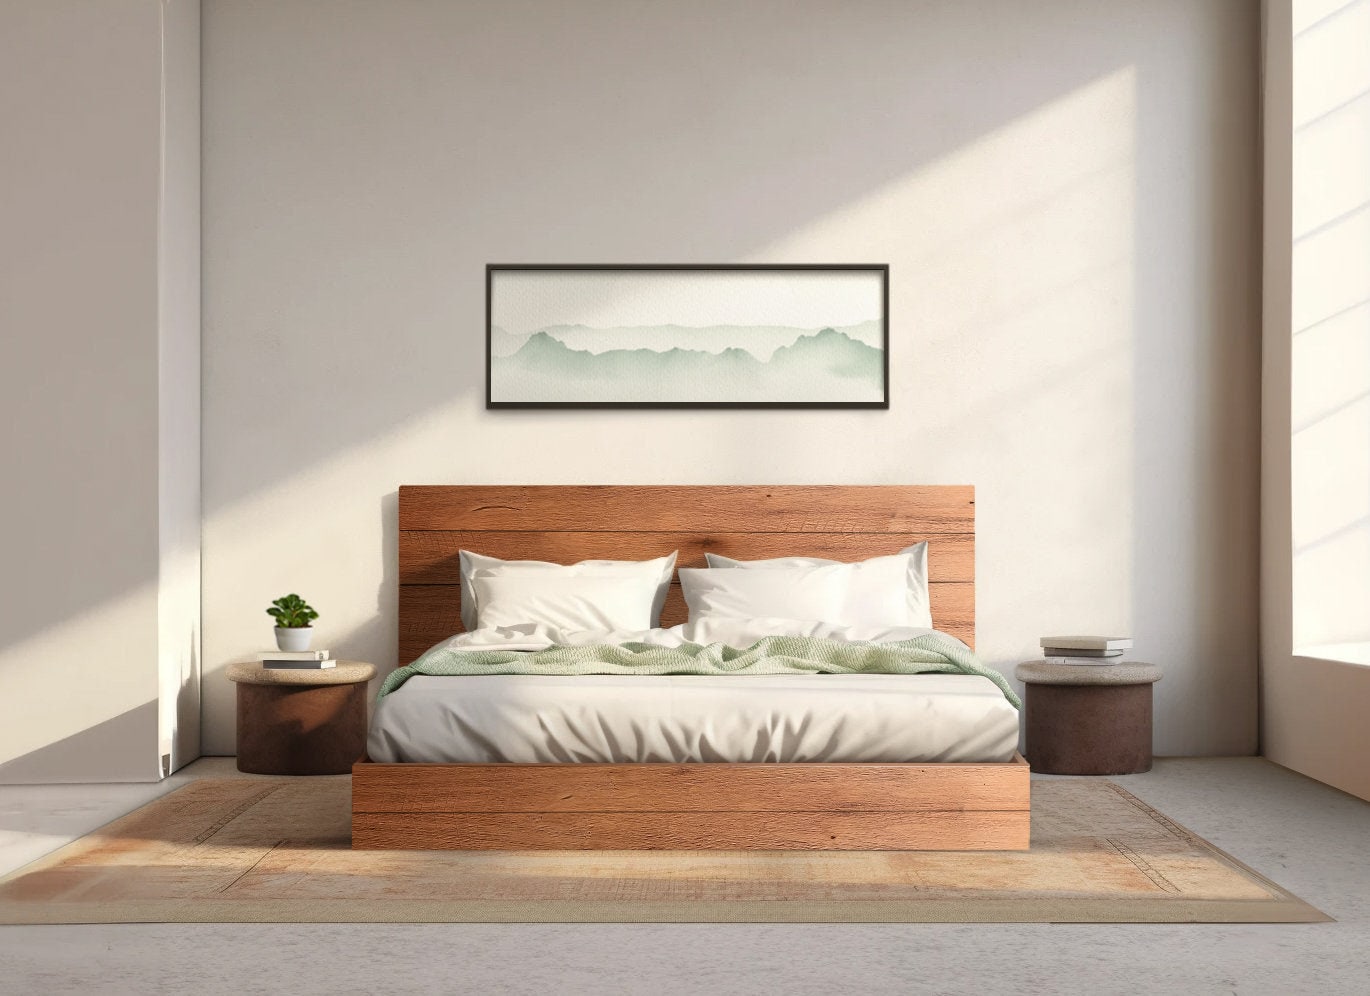 The River Bed - Quick Ship - Barnwood Reclaimed Aesthetic - Modern Rustic - Solid Wood - Platform Bed Frame & Headboard - Handmade in USA